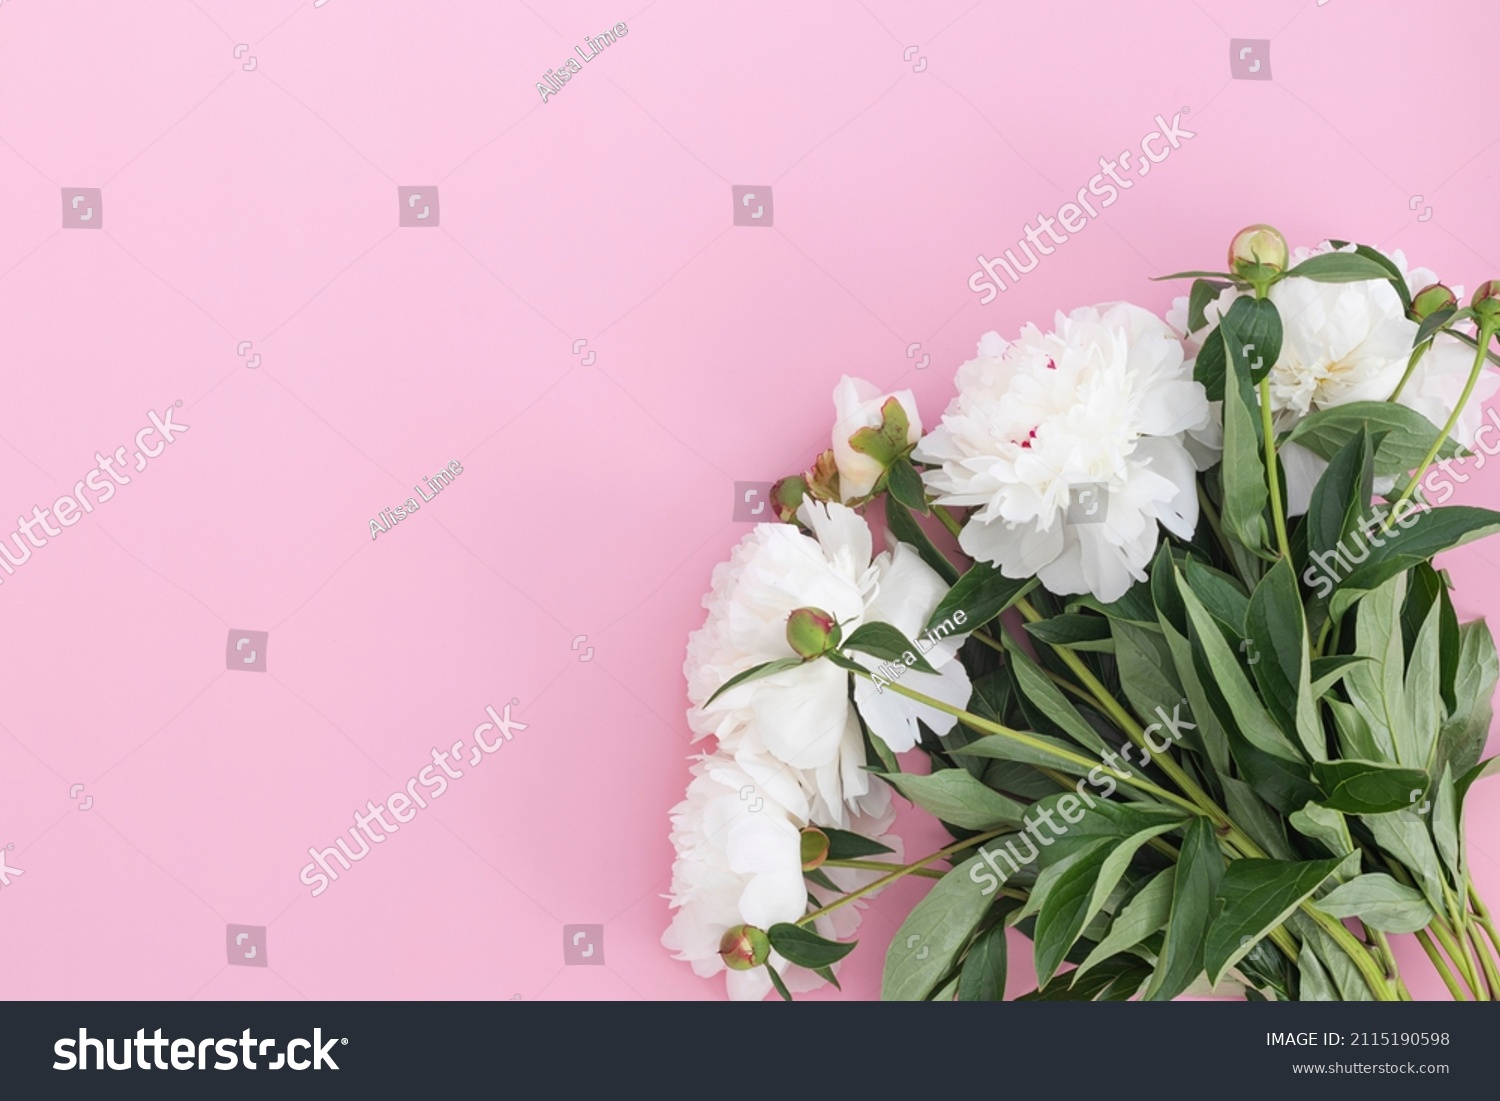 Pion Stock Photos, Images & Photography | Shutterstock